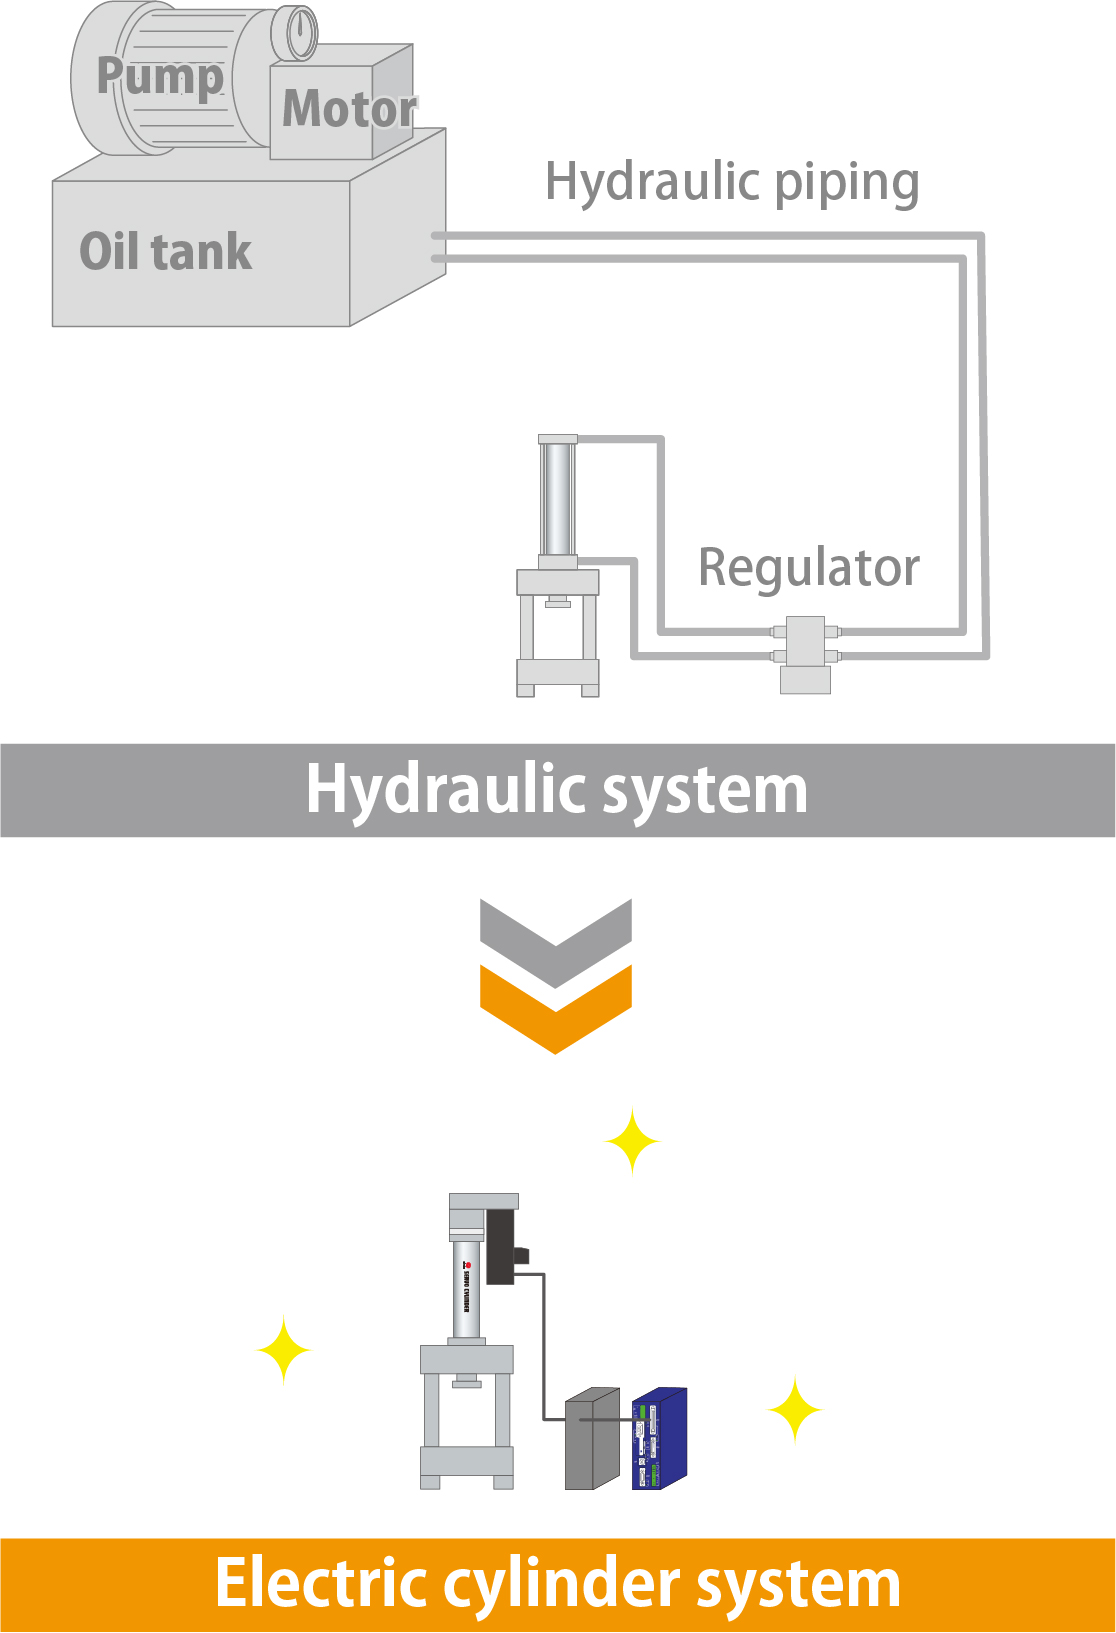 Switching from hydraulic to electric